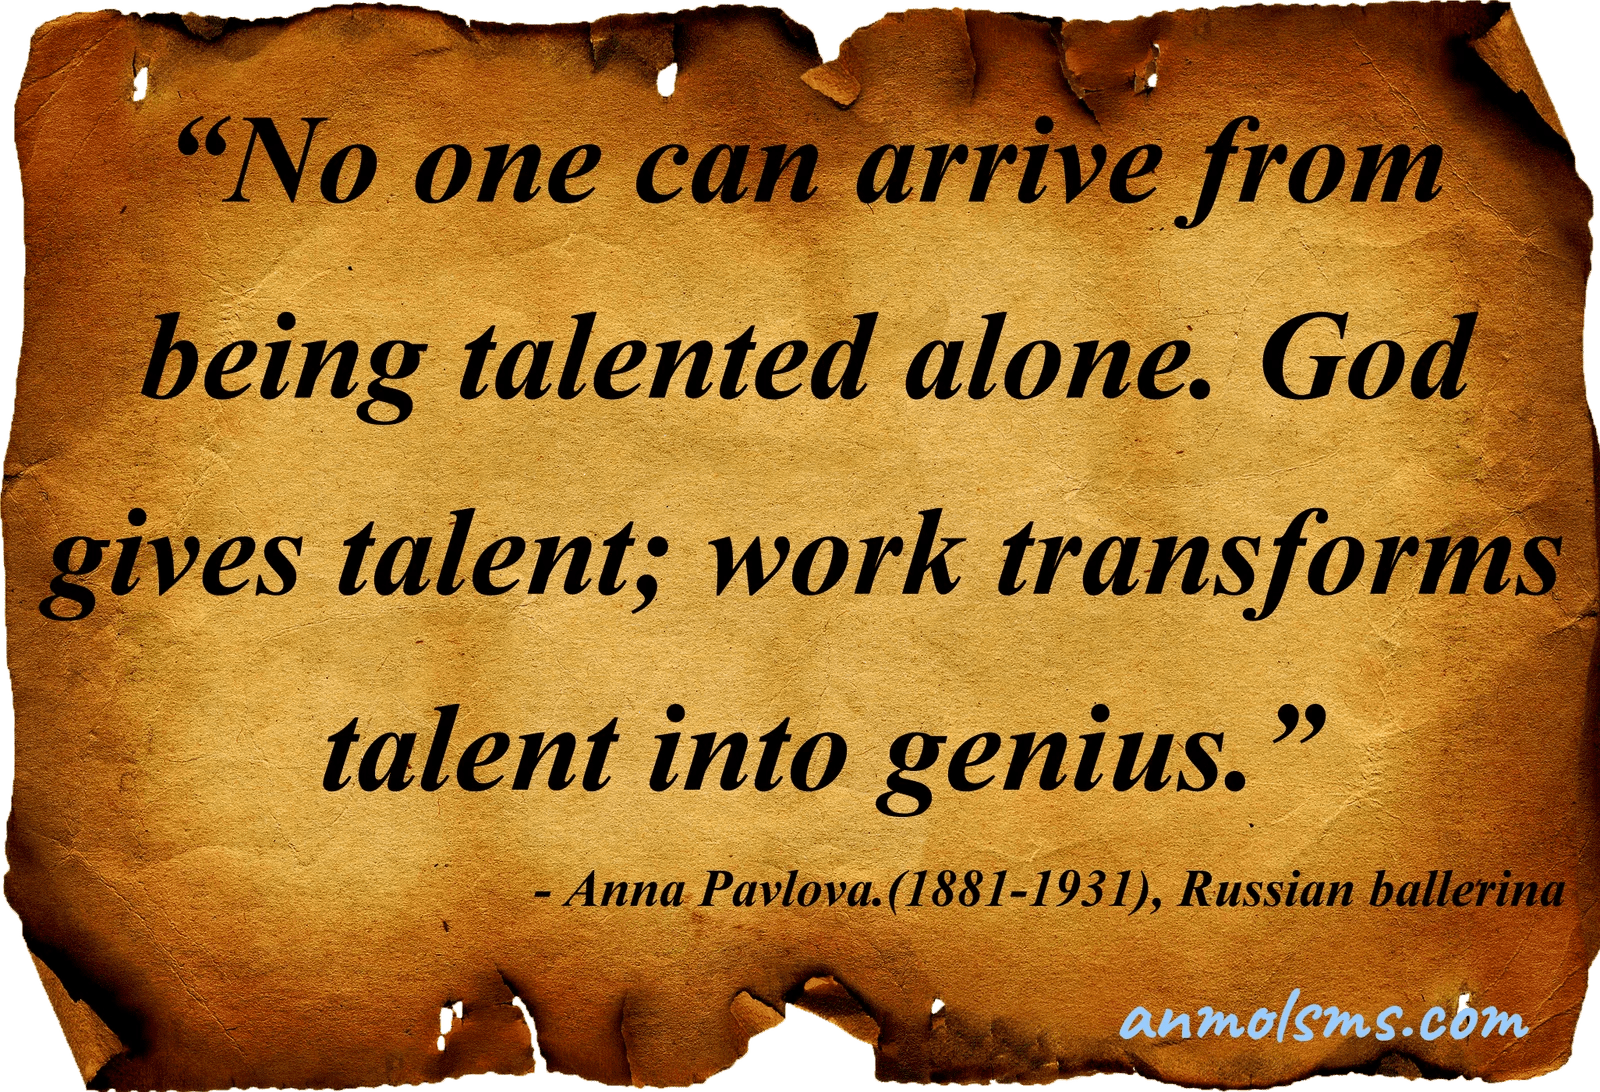 No one can arrive from being talented alone. God gives talent; work transforms talent into genius.‐ Anna Pavlova.(1881-1931), Russian ballerina